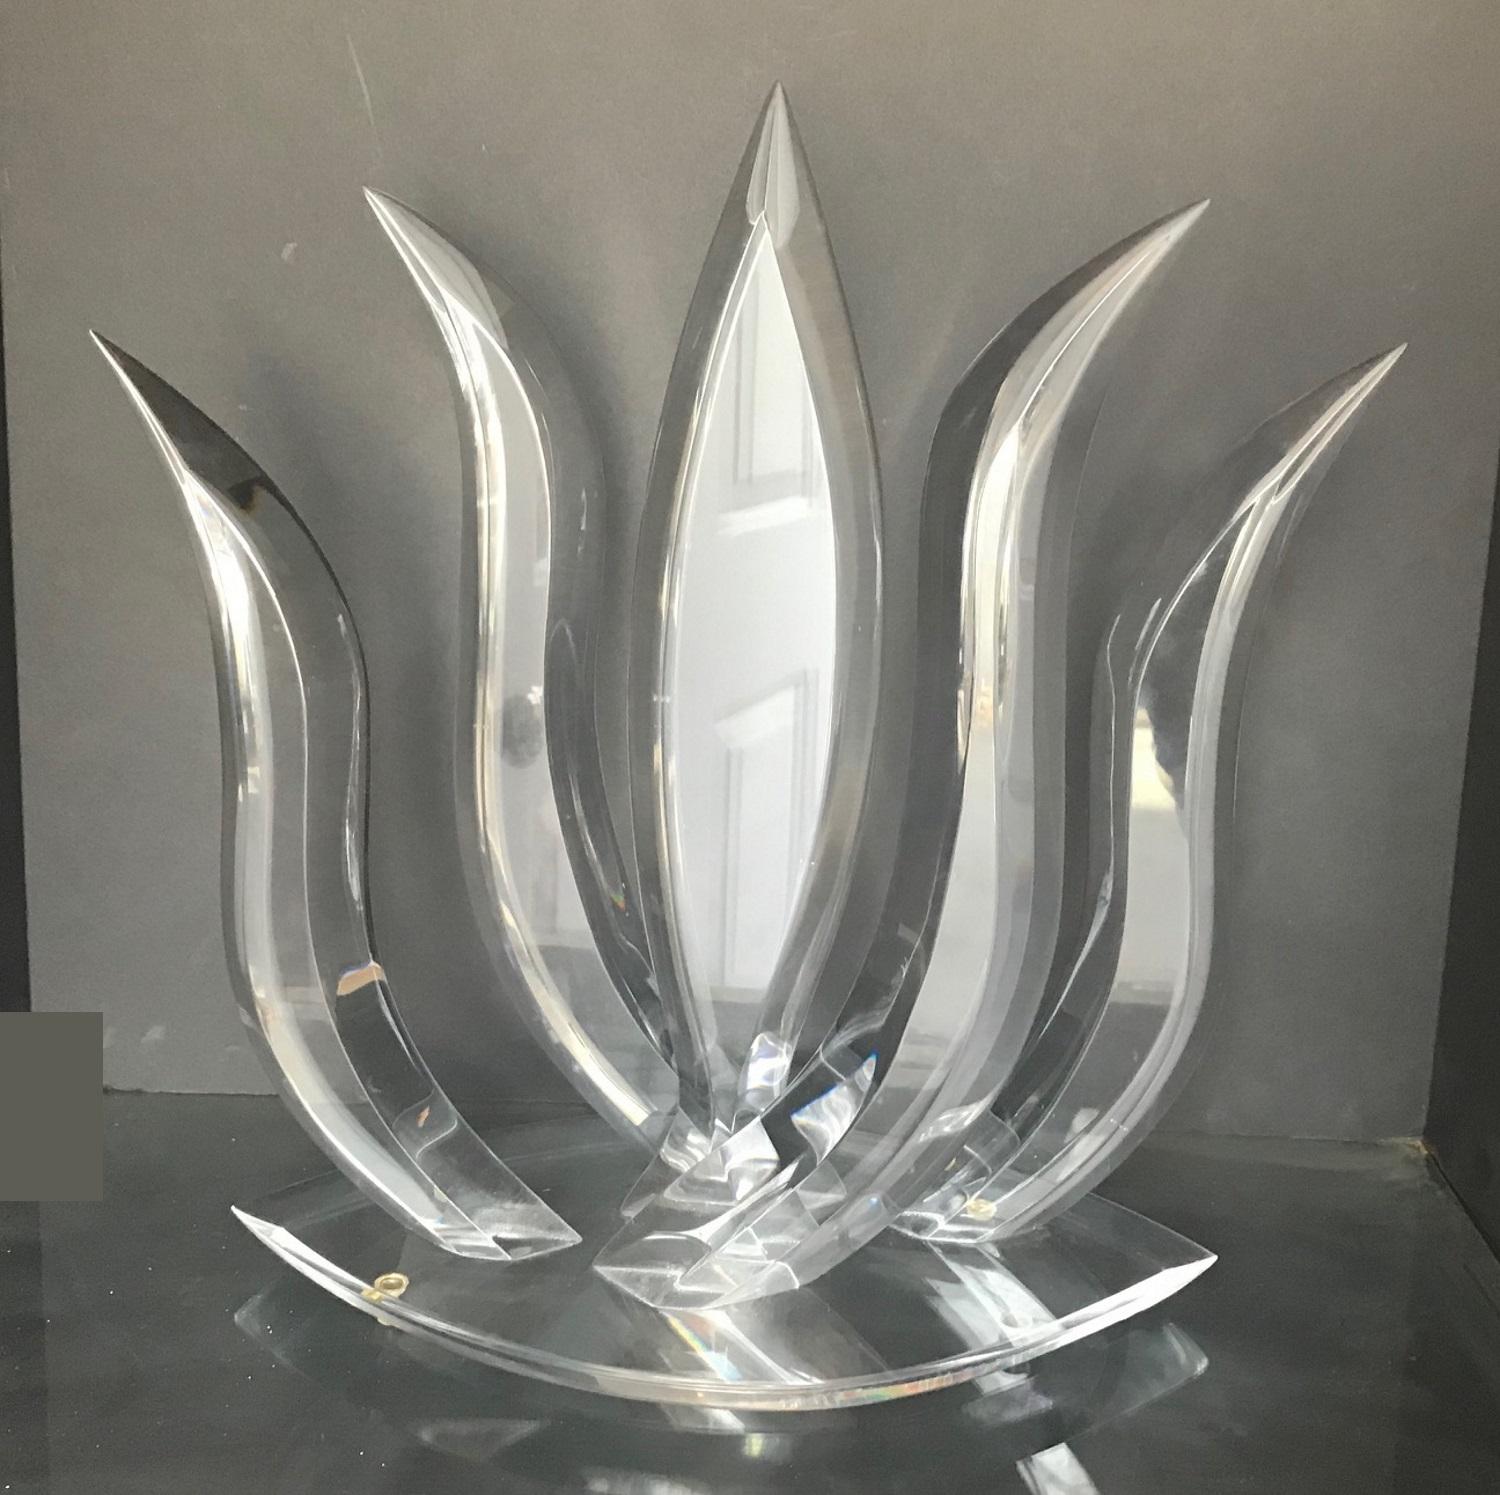 This glowing Mid-Century Modern Lucite sculpture is wonderfully reflective and may appear in cool light as ice or in warm, as fire. The pointed ends reach outward in a balanced abstract design. It is an appealing piece from all angles that makes a